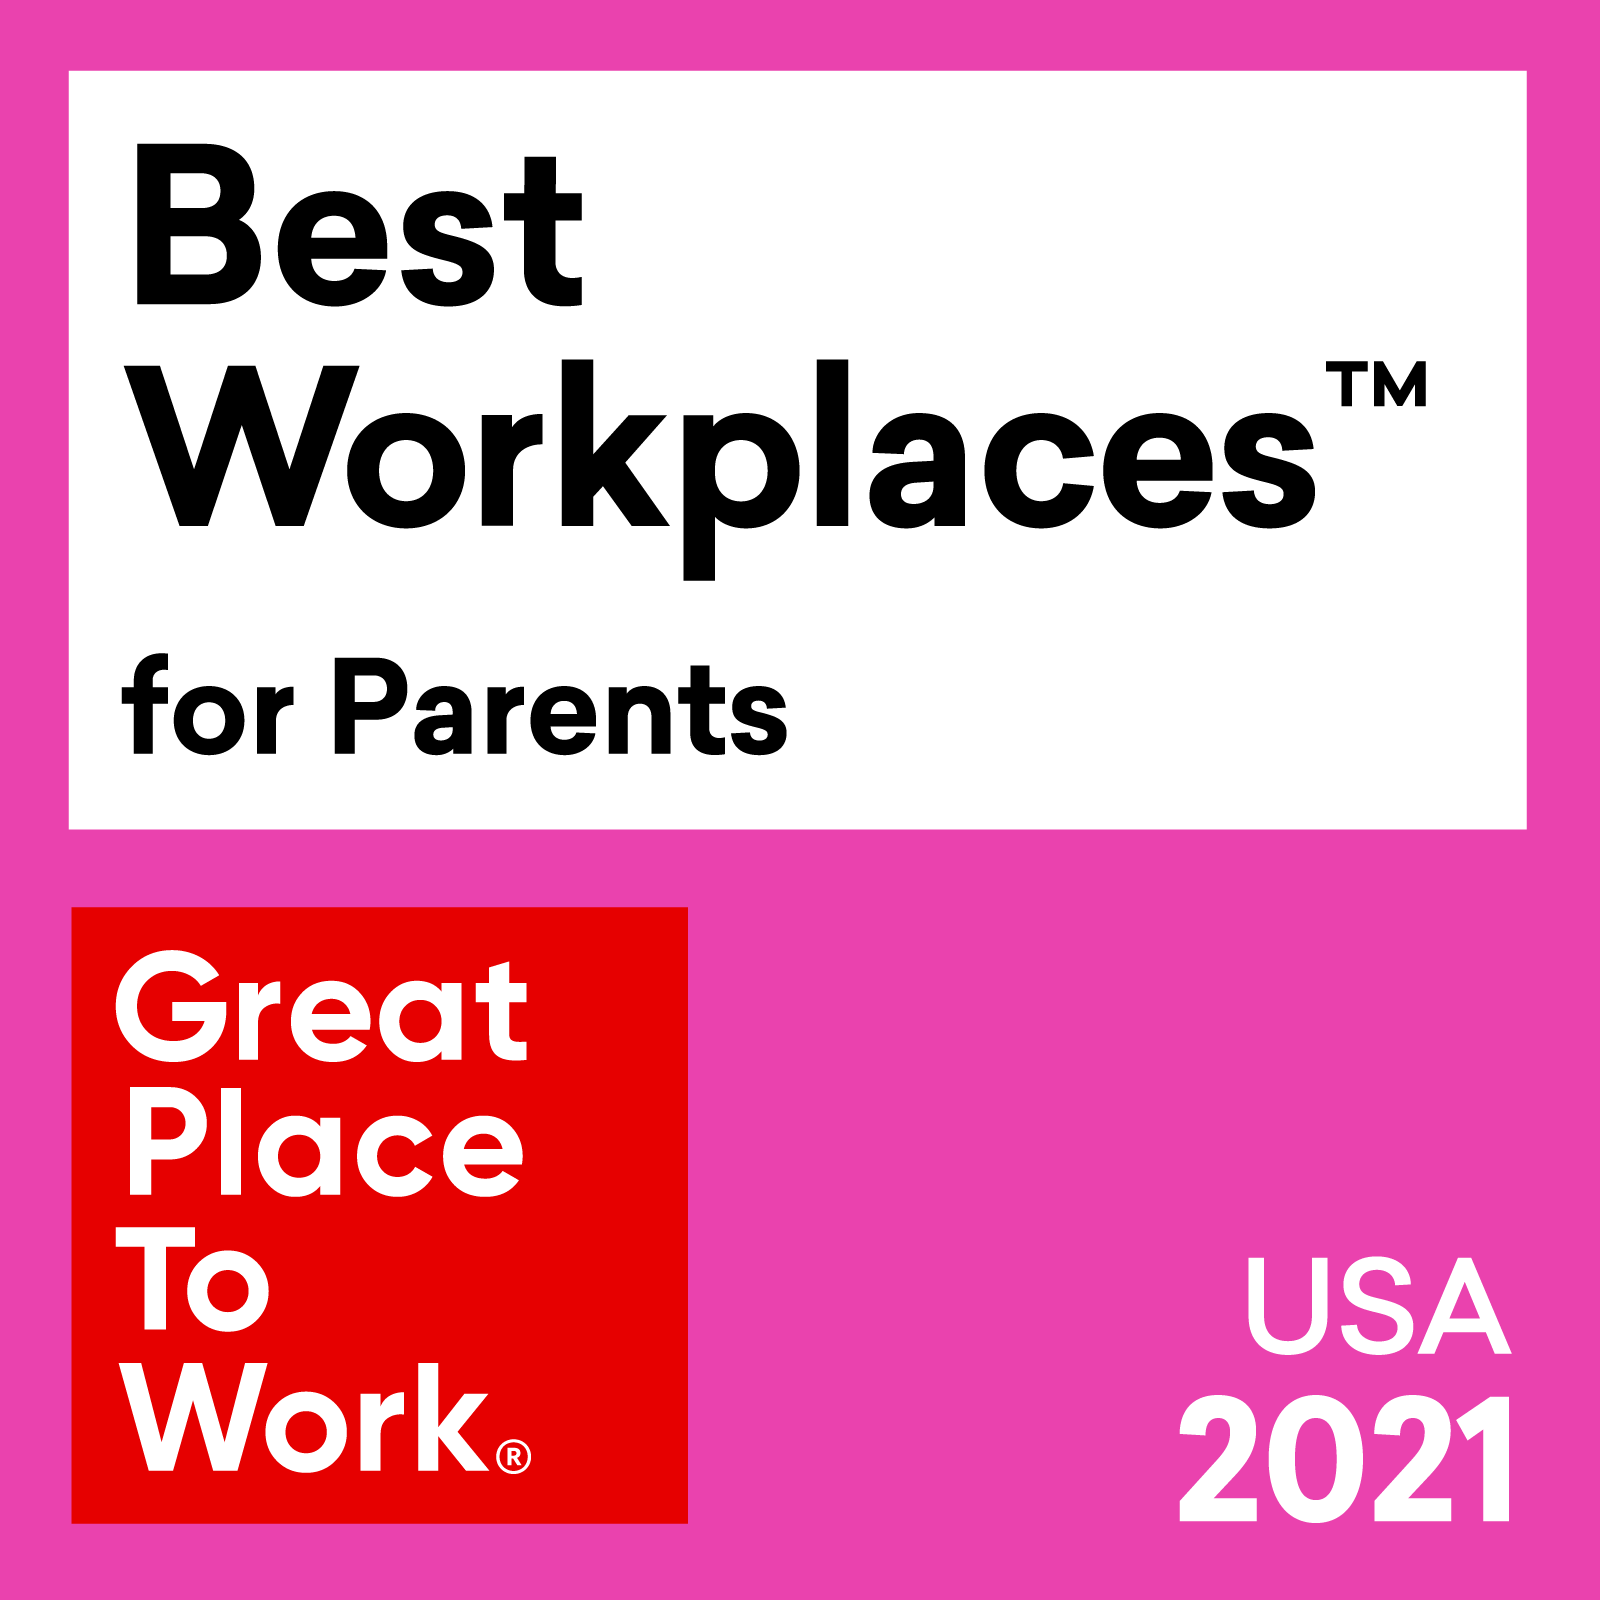 Best Workplaces for Parents. Great Place to Work, USA 2021